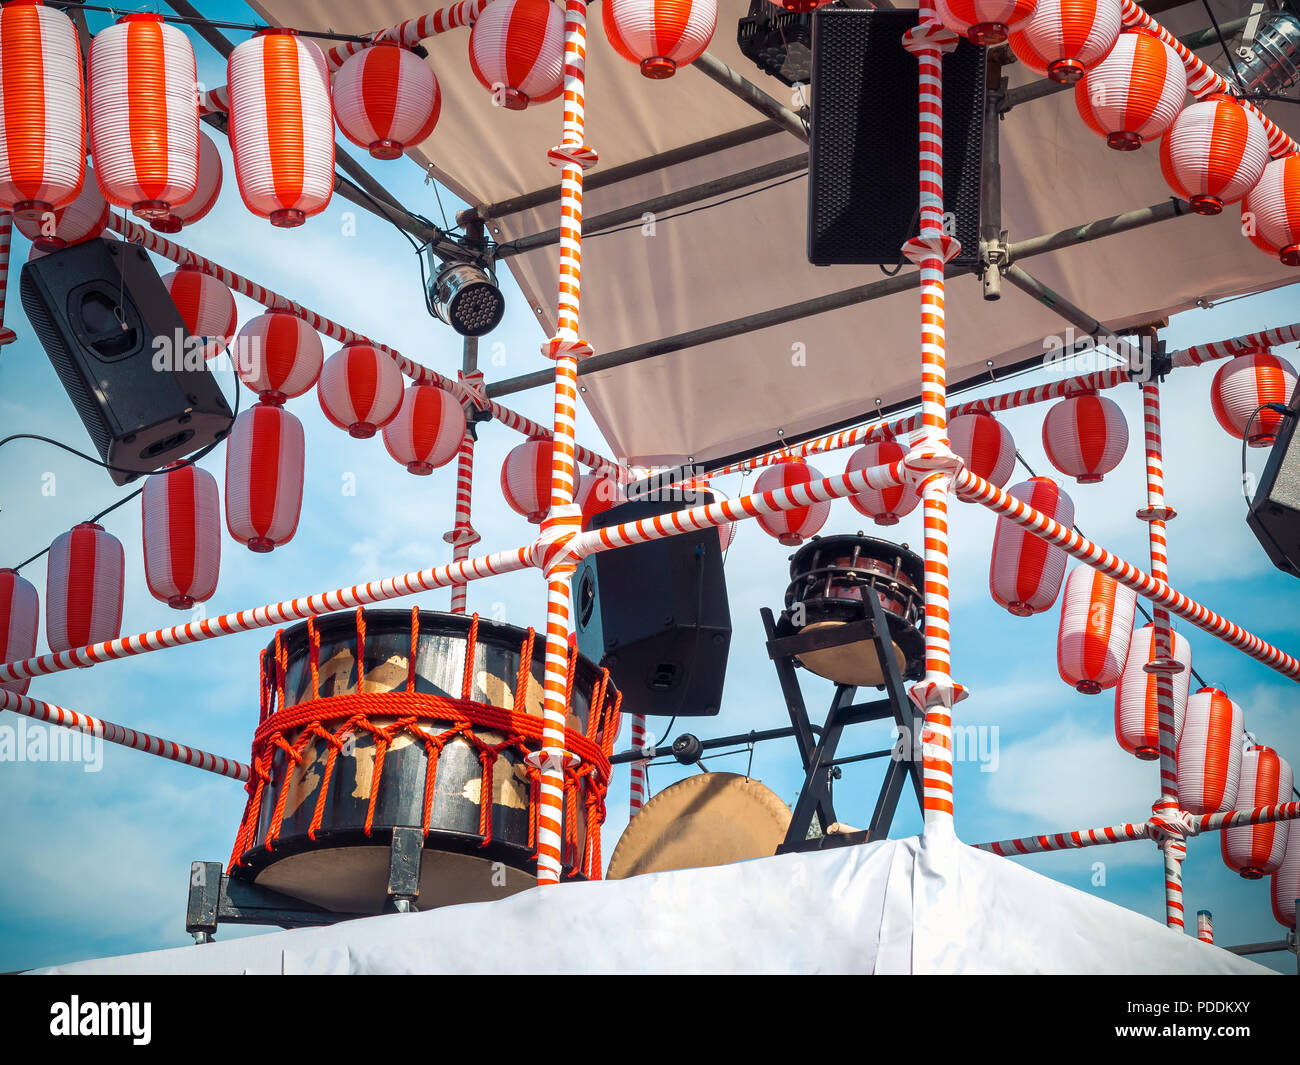 The stage of the Yaguro. Paper red-white lanterns Chochin Scenery for the holiday Obon when people dance of Bon Odori. Stock Photo